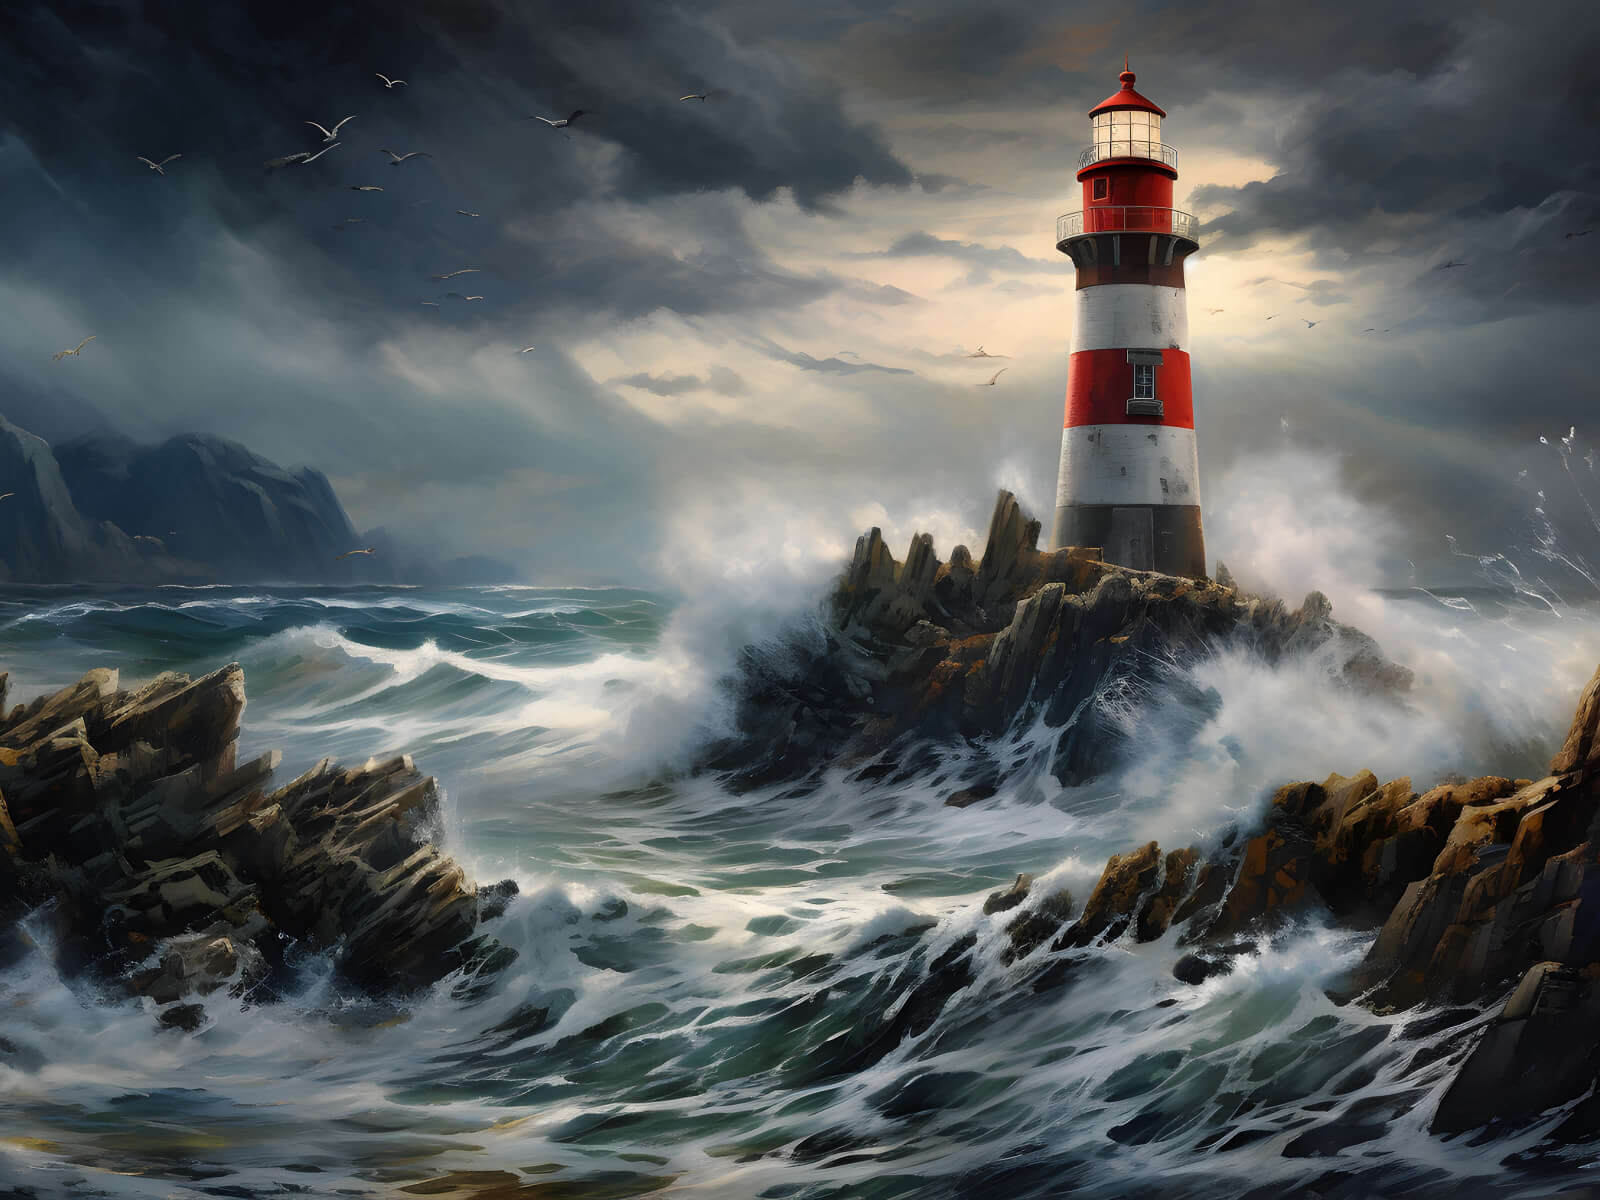 Lighthouse in the ocean waves wallpaper 1280x960